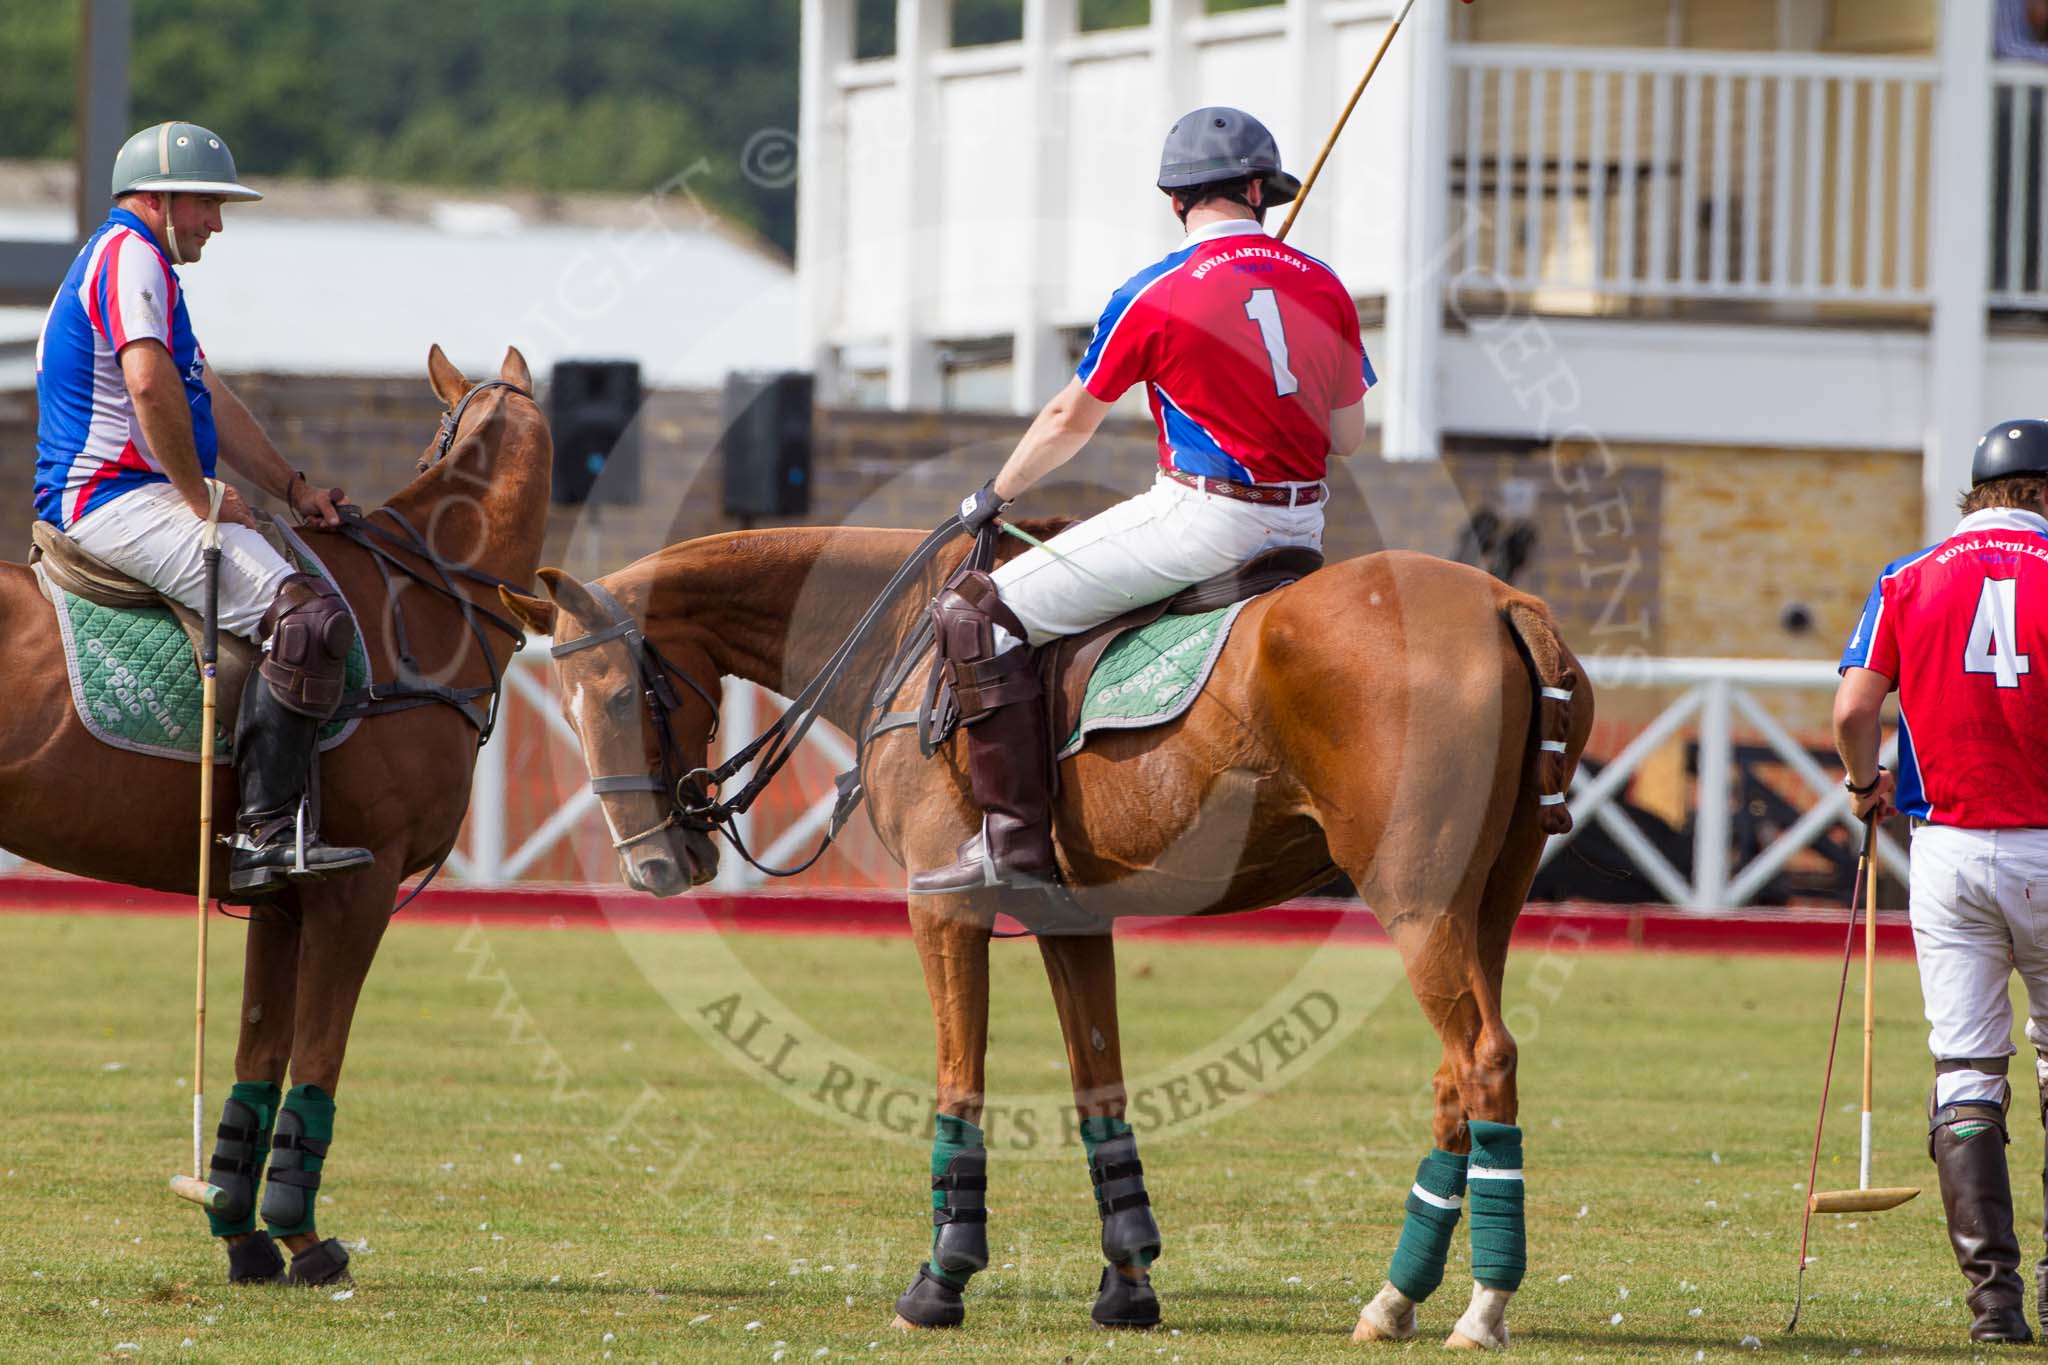 DBPC Polo in the Park 2013.
Dallas Burston Polo Club, ,
Southam,
Warwickshire,
United Kingdom,
on 01 September 2013 at 14:14, image #386